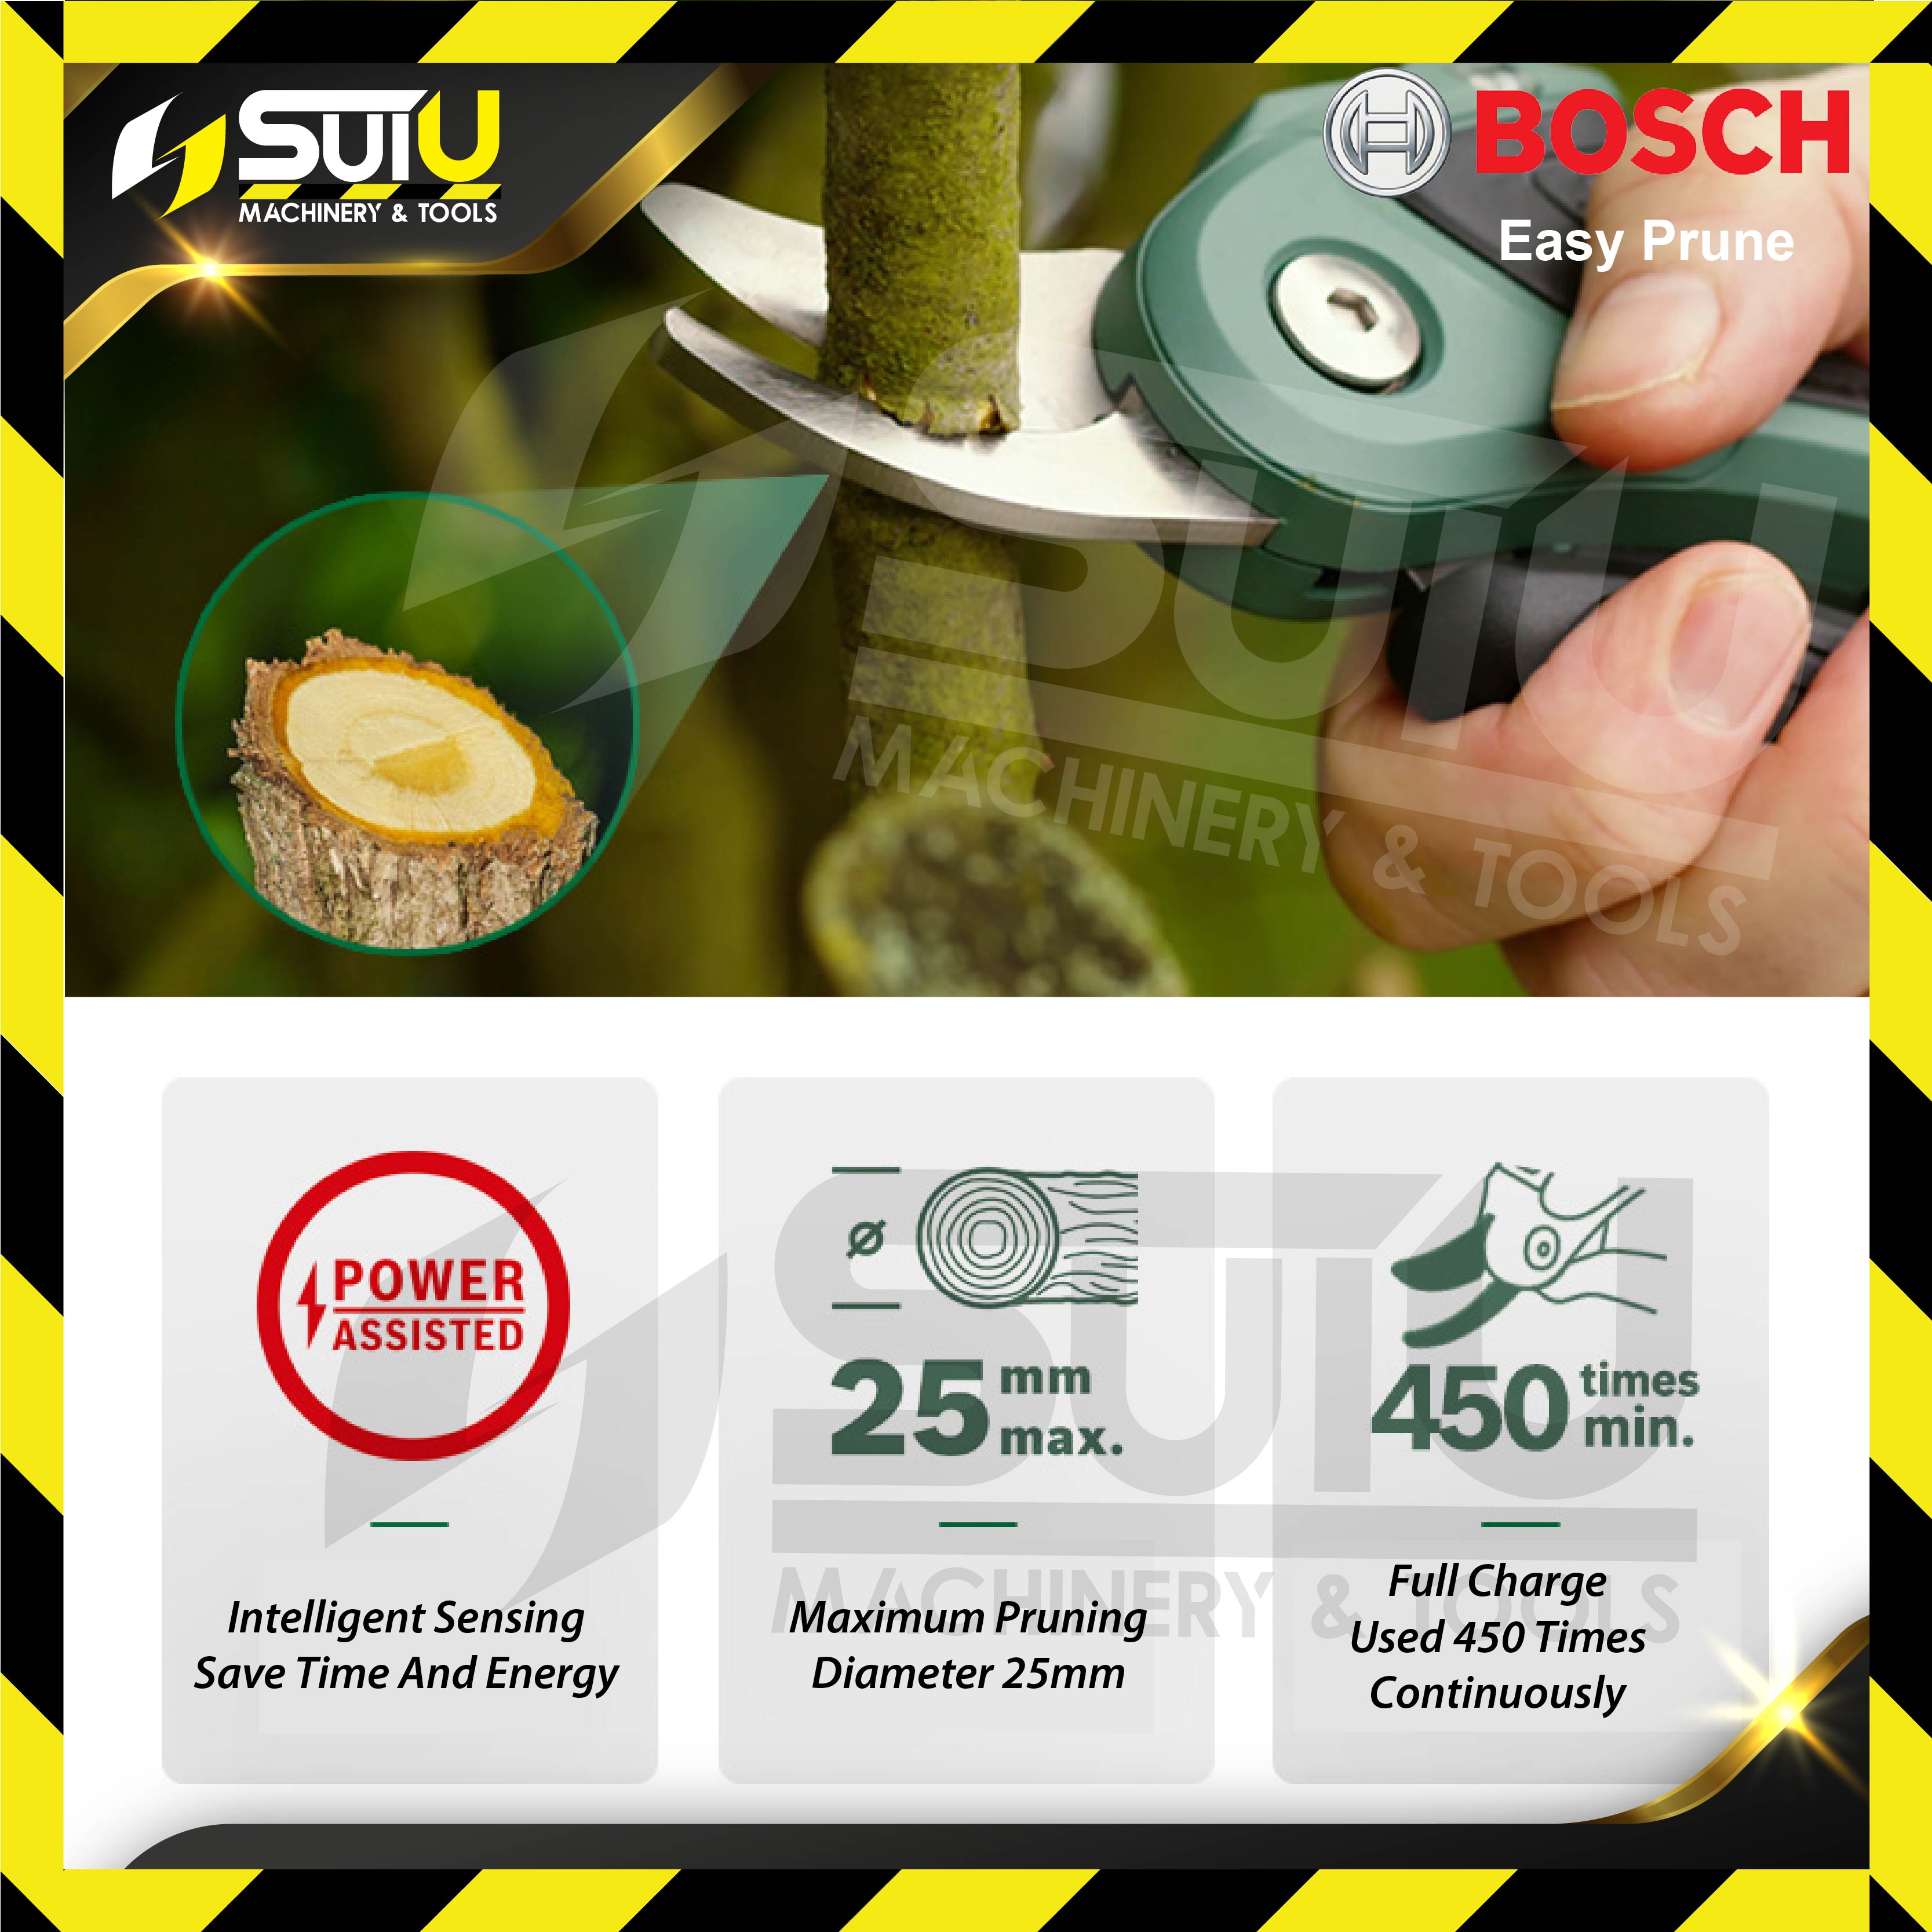 BOSCH EasyPrune 3.6V Cordless Secateur (06008B2140) Other Agriculture &  Gardening Kuala Lumpur (KL), Malaysia, Selangor, Setapak Supplier,  Suppliers, Supply, Supplies | Sui U Machinery & Tools (M) Sdn Bhd